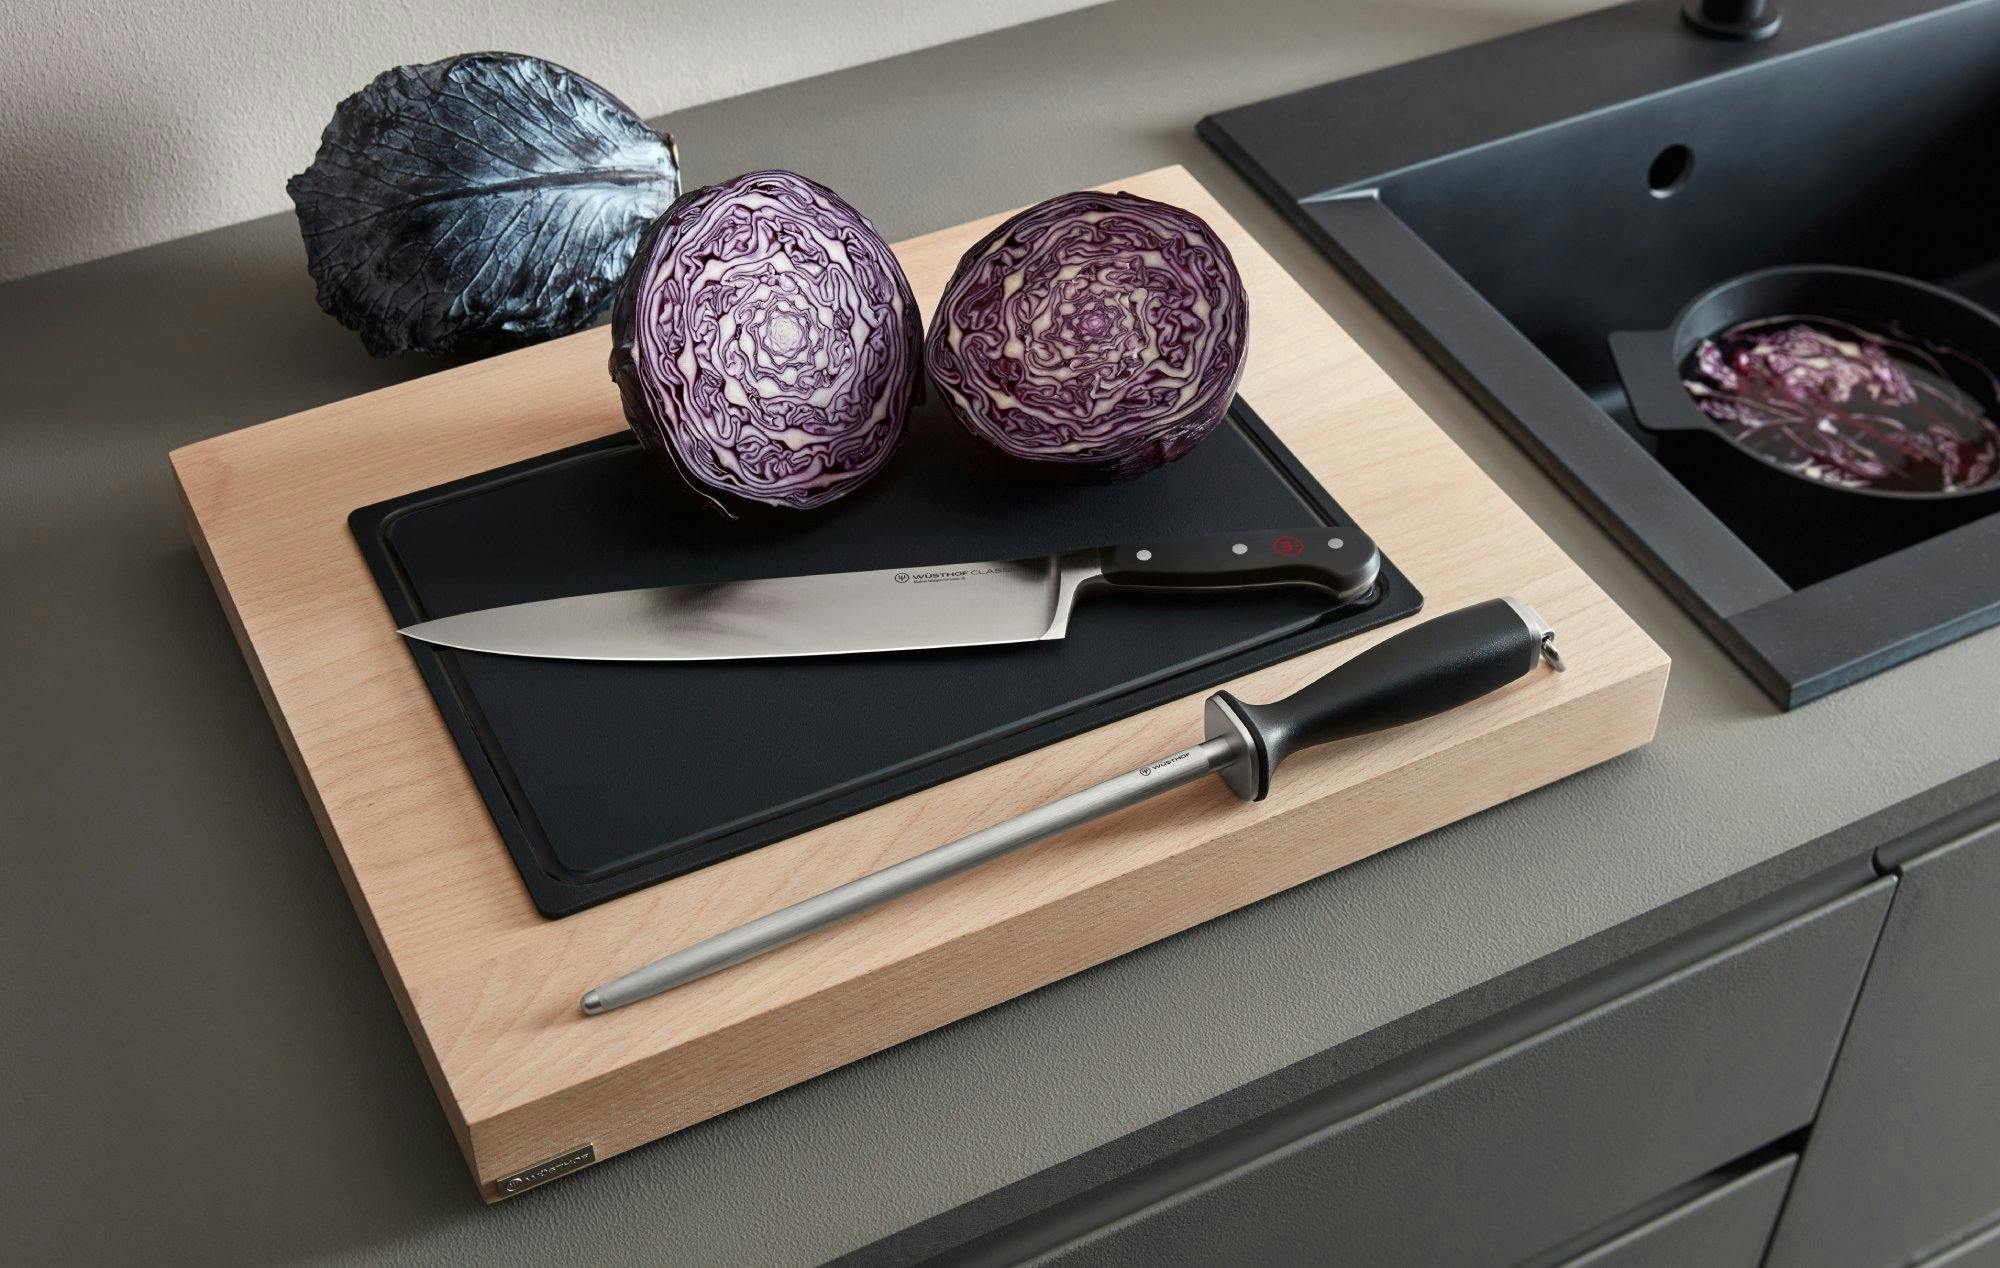 Wusthof Knife and sharpening honing steel next to a freshly-cut red cabbage